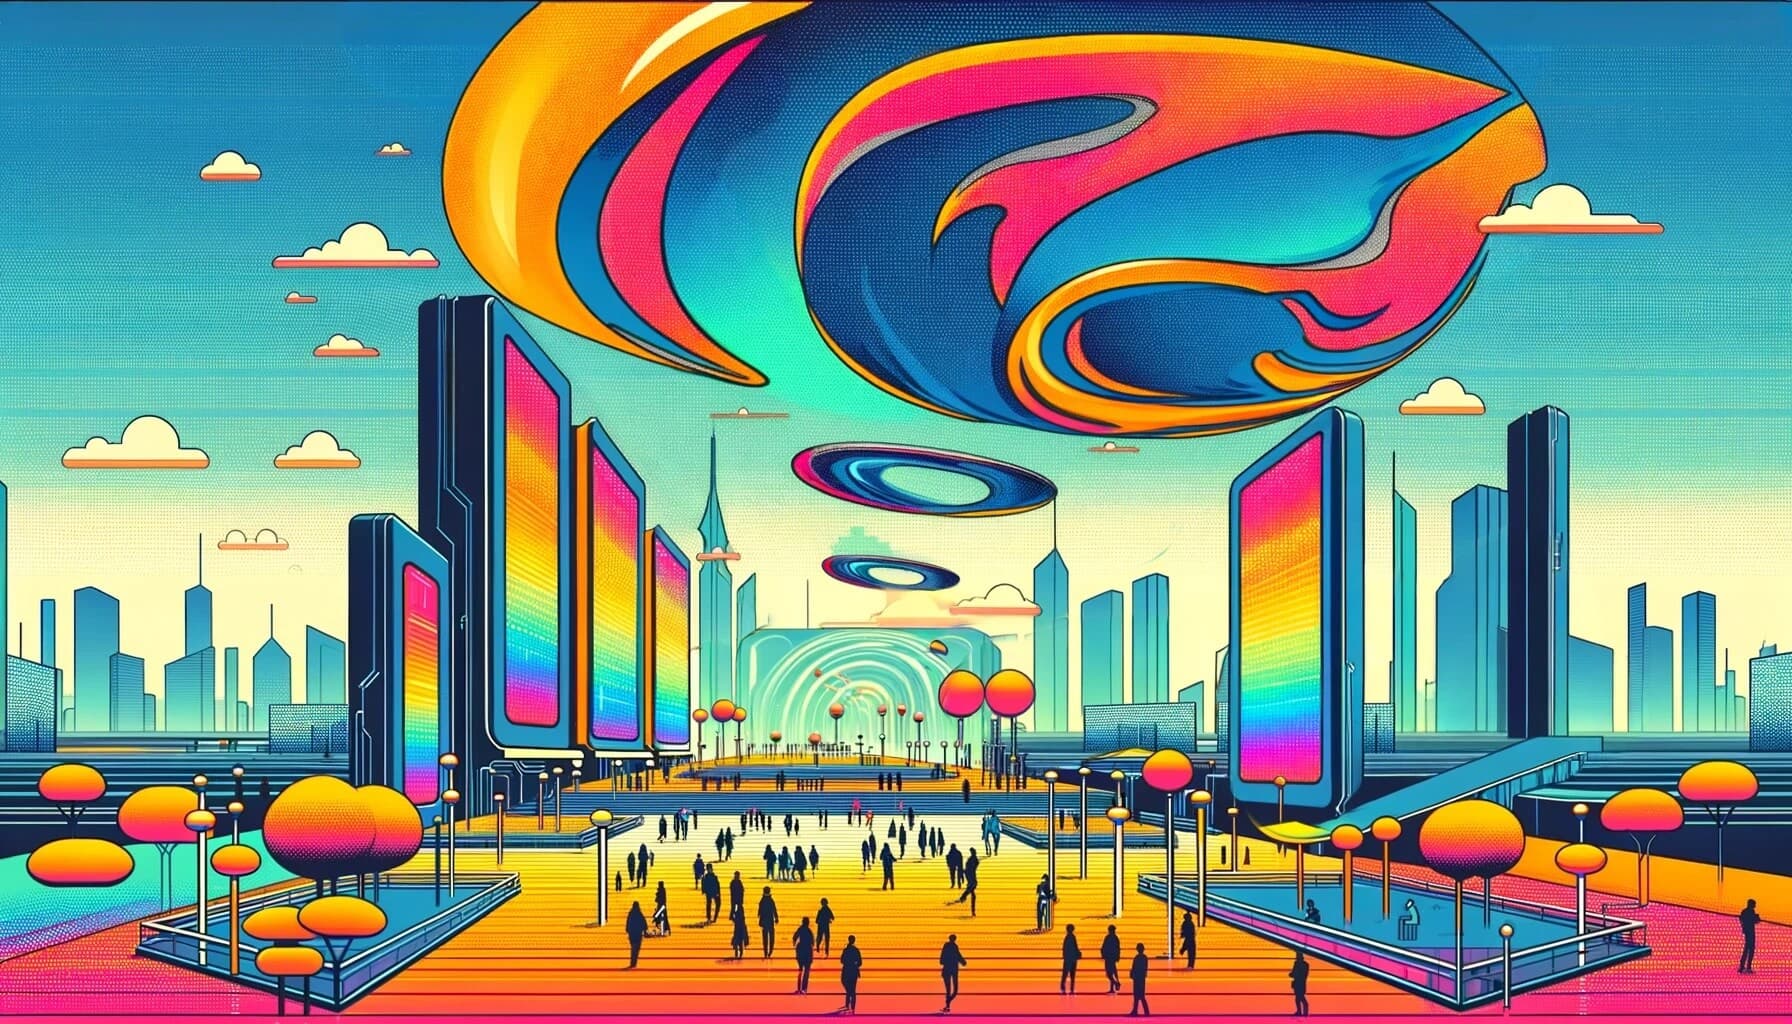 A futuristic cityscape with abstract wave-like forms and colorful geometric shapes, representing the vibrancy and accessibility enabled by the proposed algorithmic BRICS digital currency built on blockchain technology, illustrated to introduce the section on the BRICS digital currency itself.